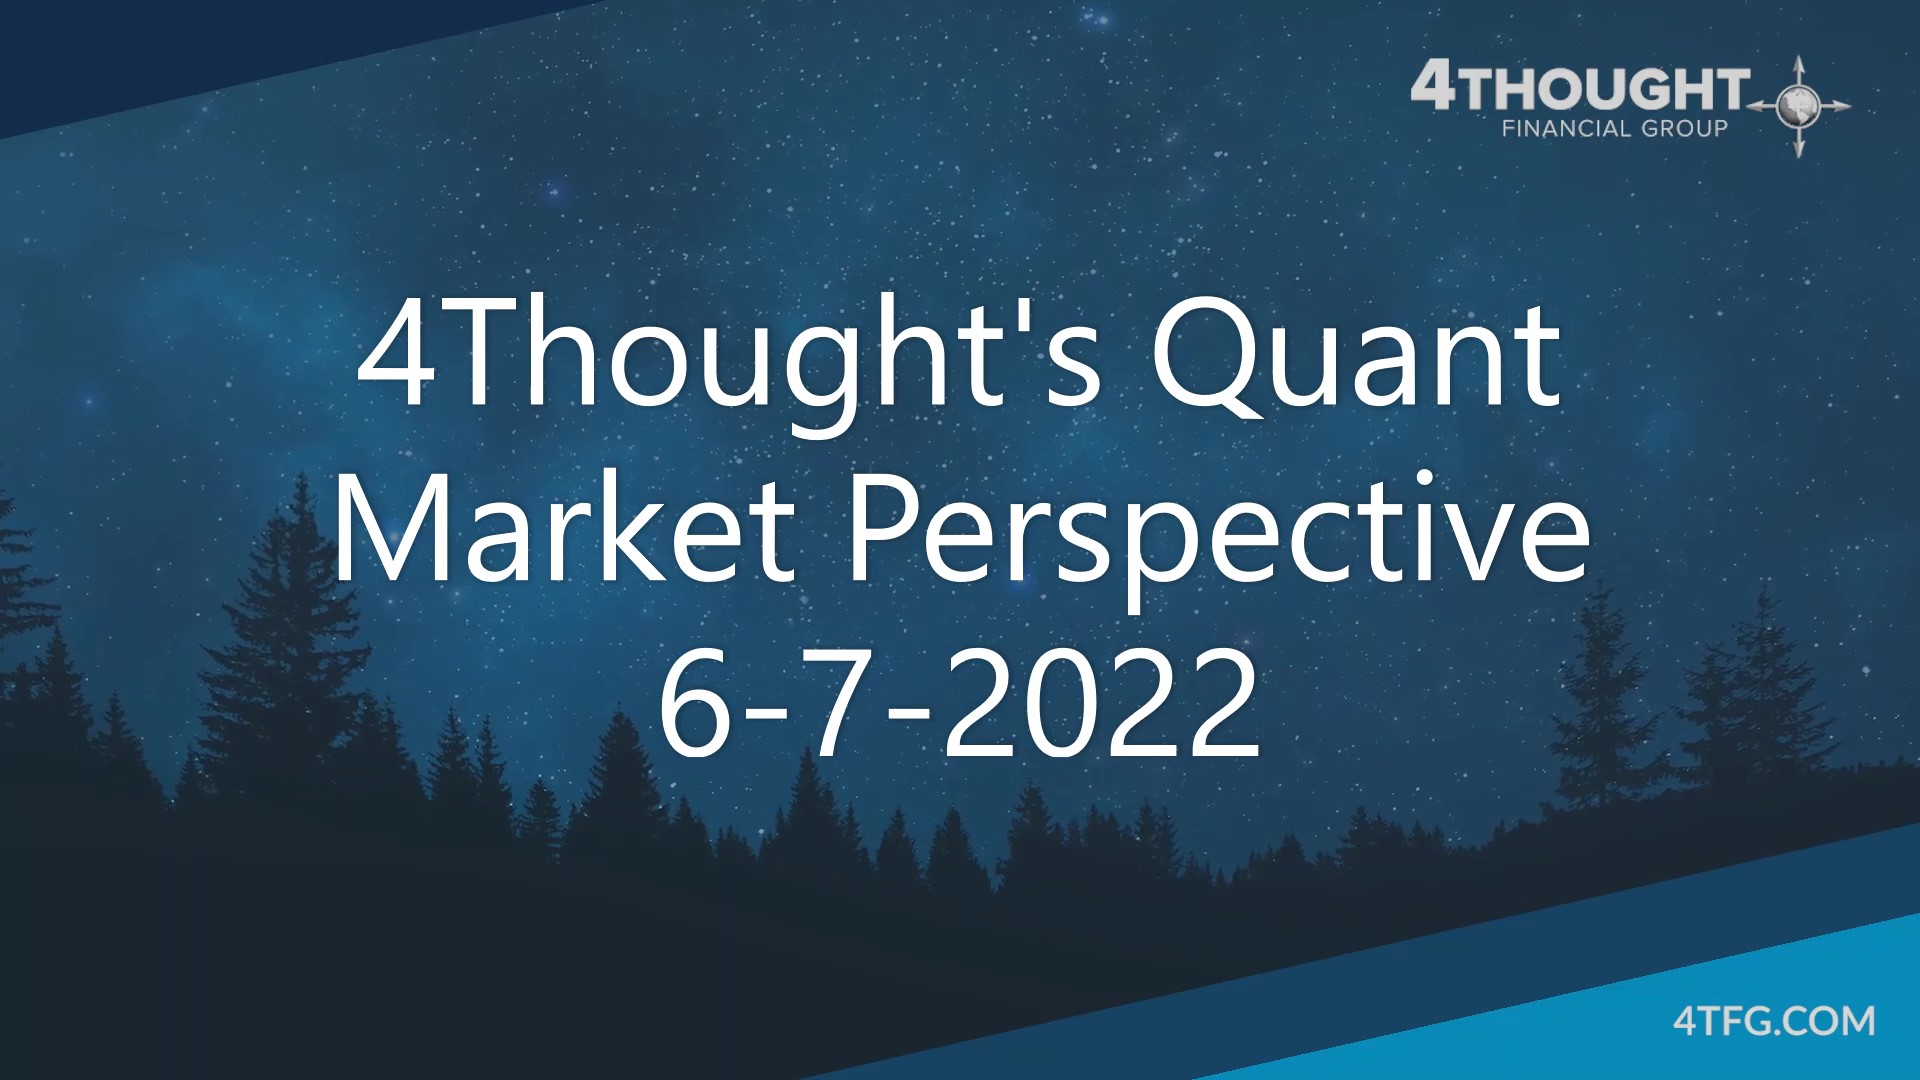 4Thought’s Quant Market Perspective 6-7-22